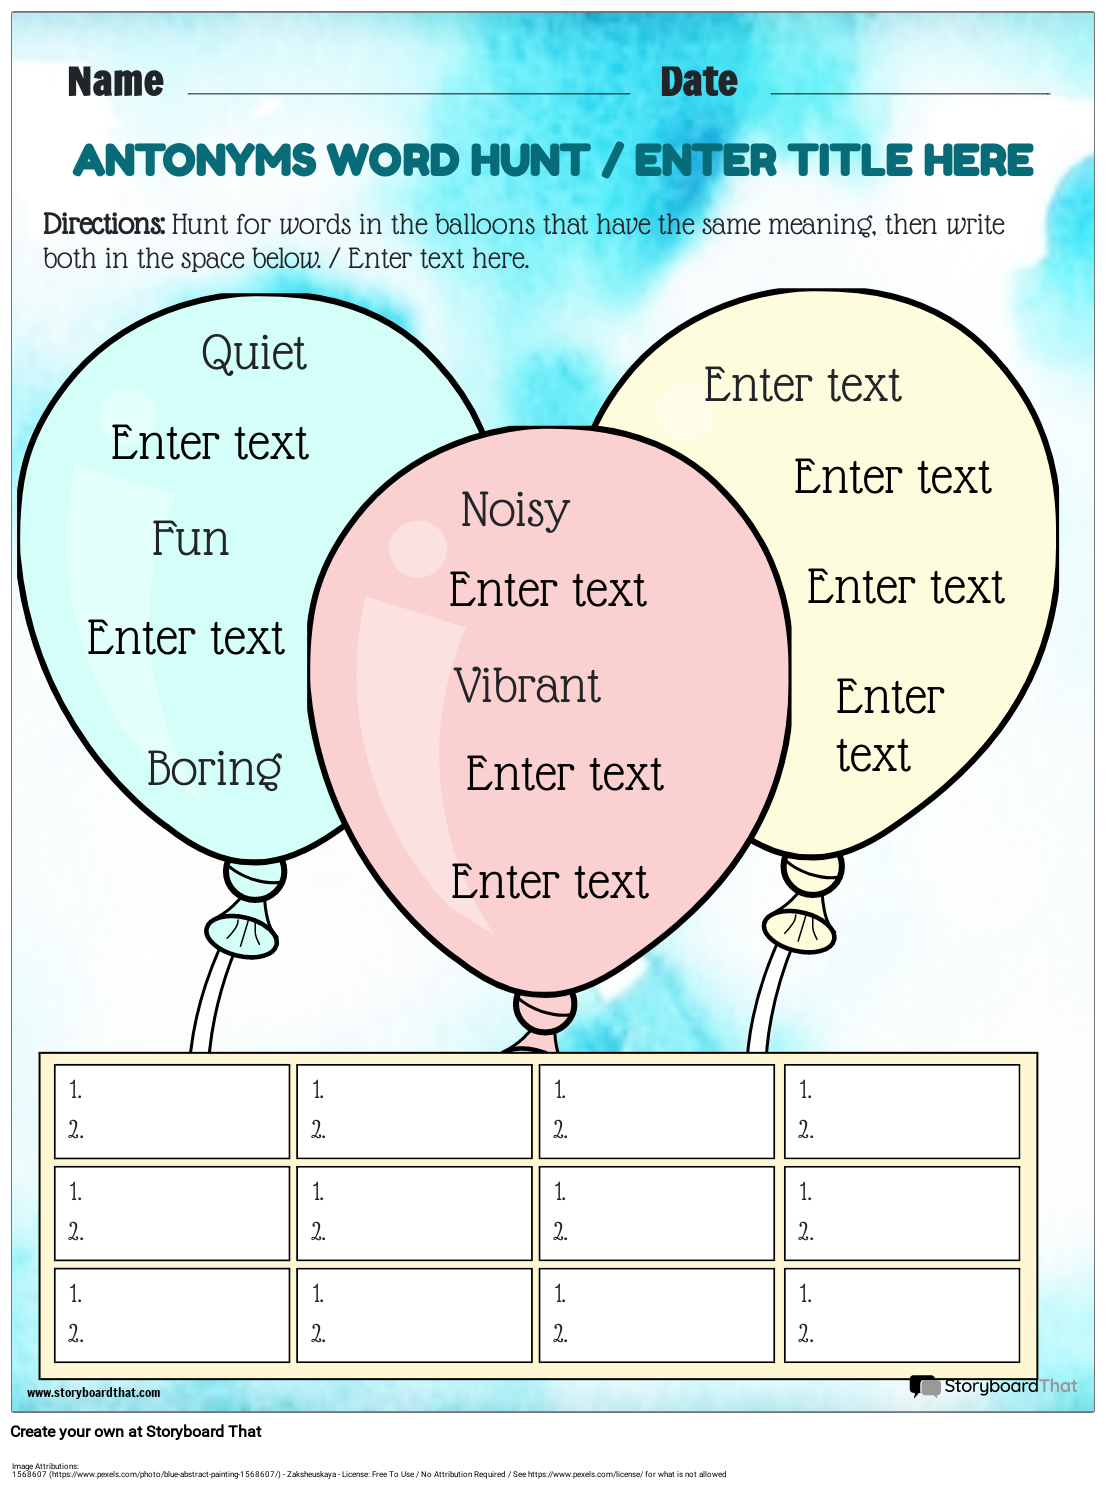 Word Hunt for Synonyms Worksheet